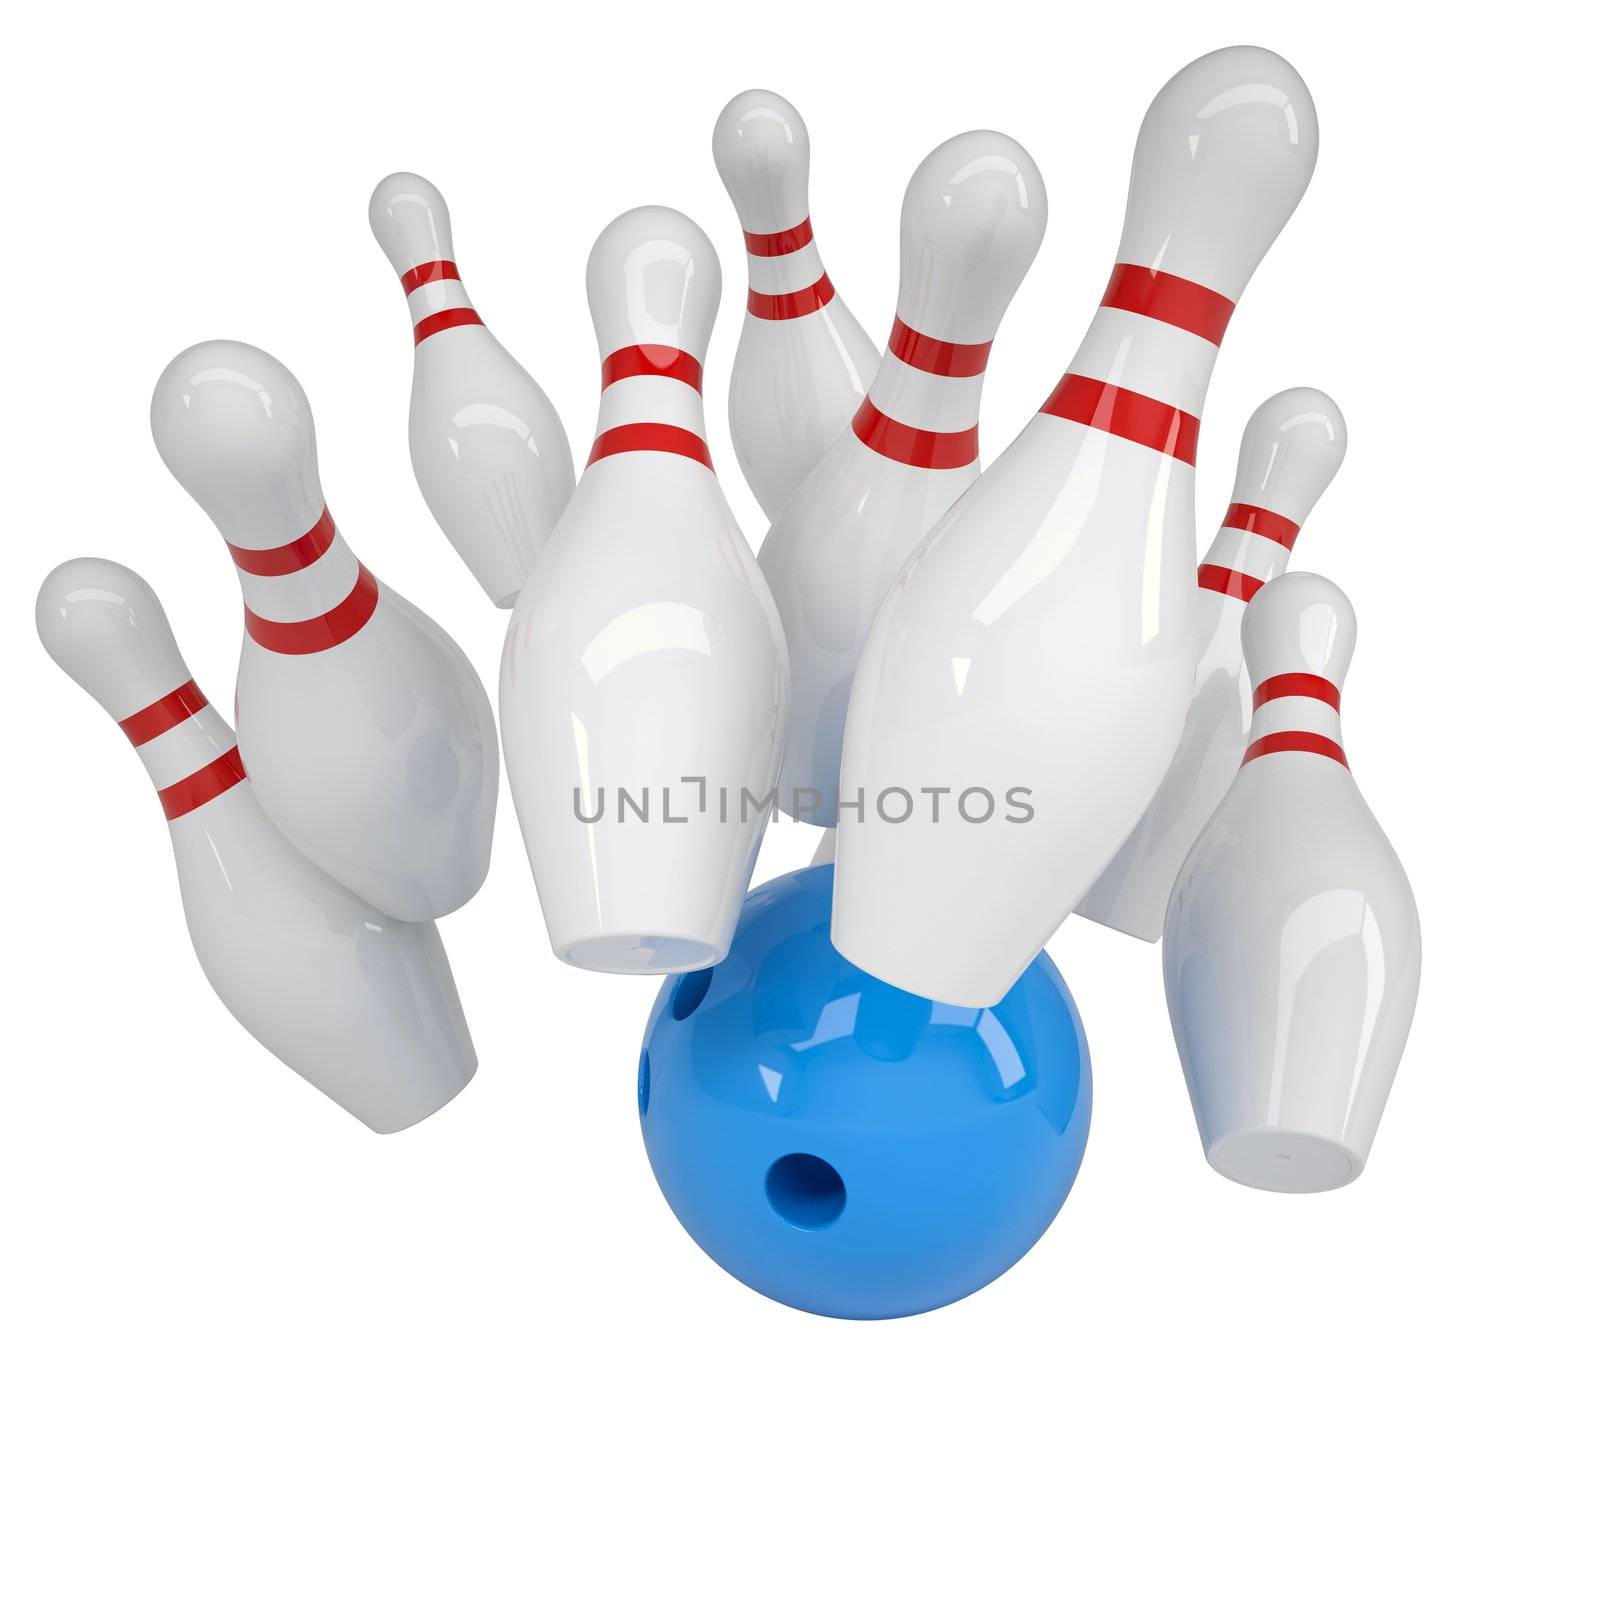 Blue ball knocks down pins for bowling. Isolated render on a white background